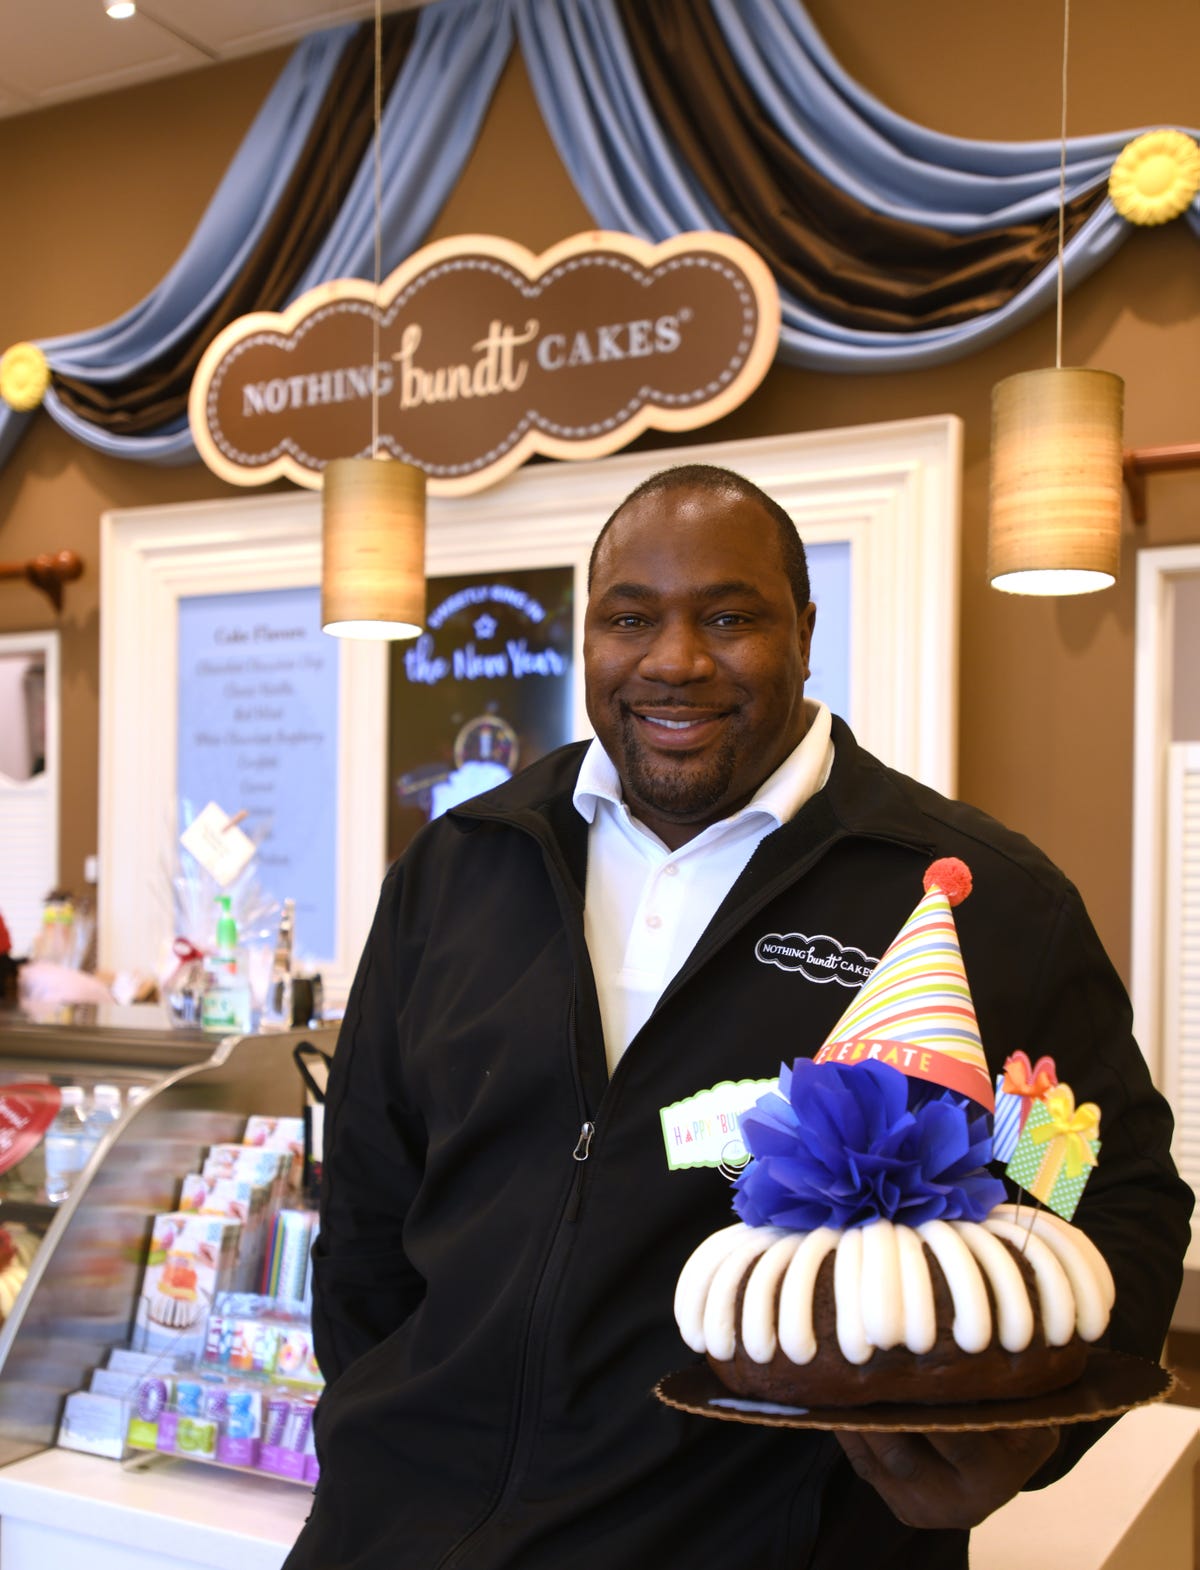 how many locations does nothing bundt cakes have